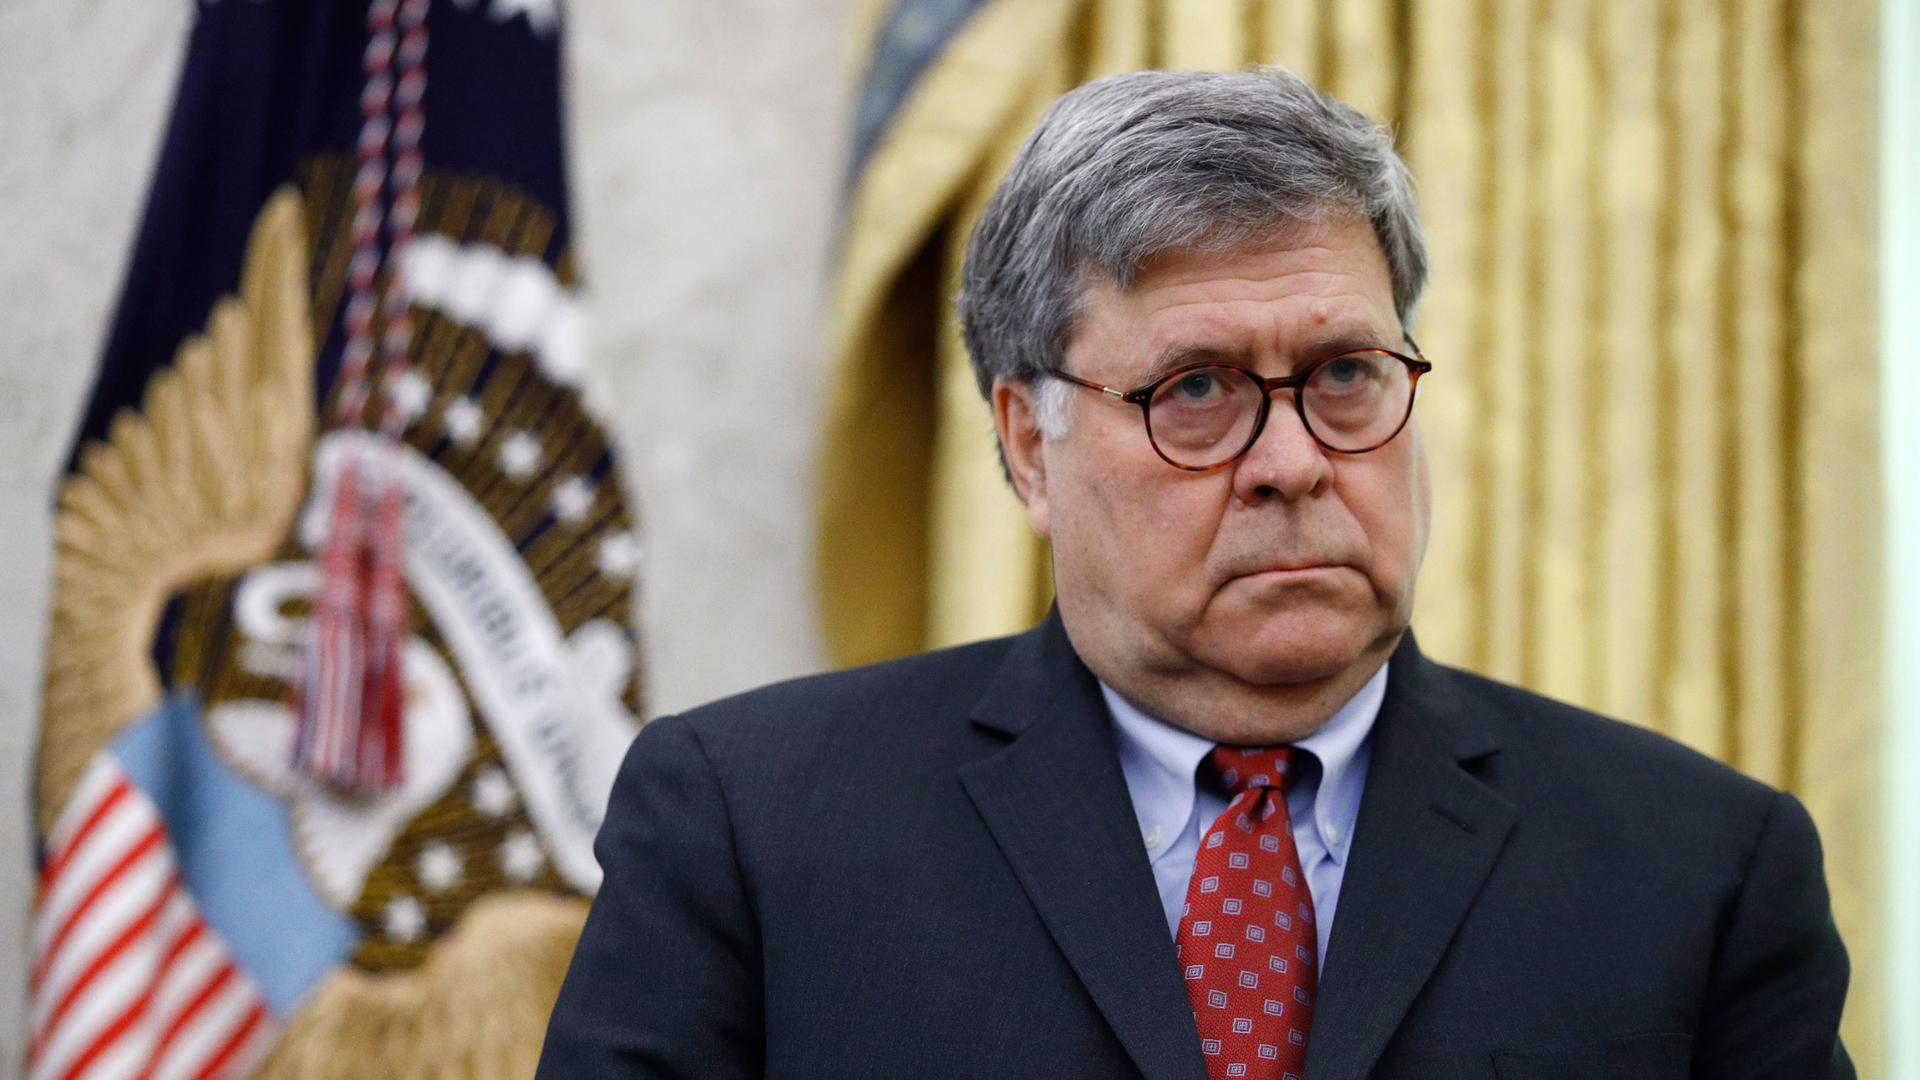 Attorney General William Barr is shown wearing a dark suit and red tie while standing in front of the POTUS flag.